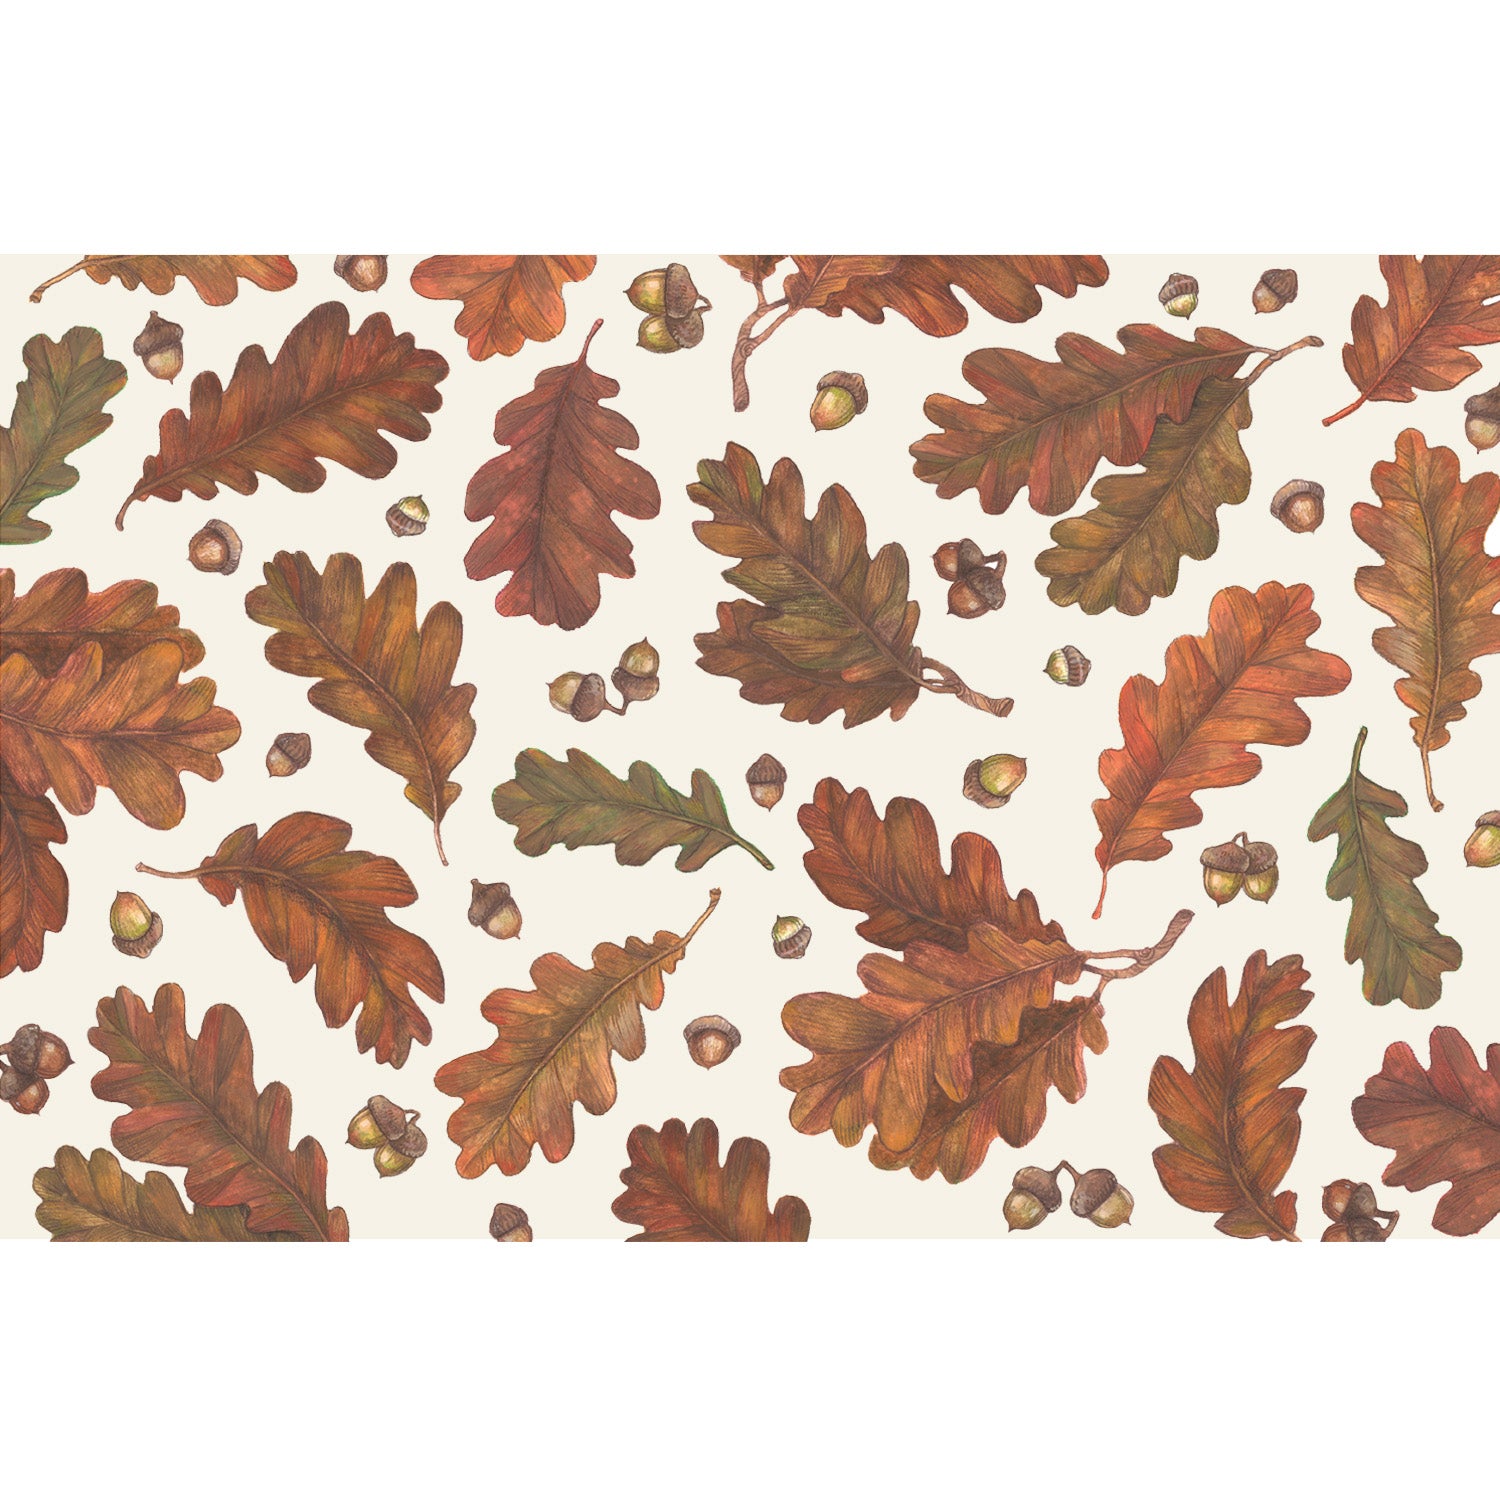 Orange and brown oak leaves scattered with acorns on a white background.